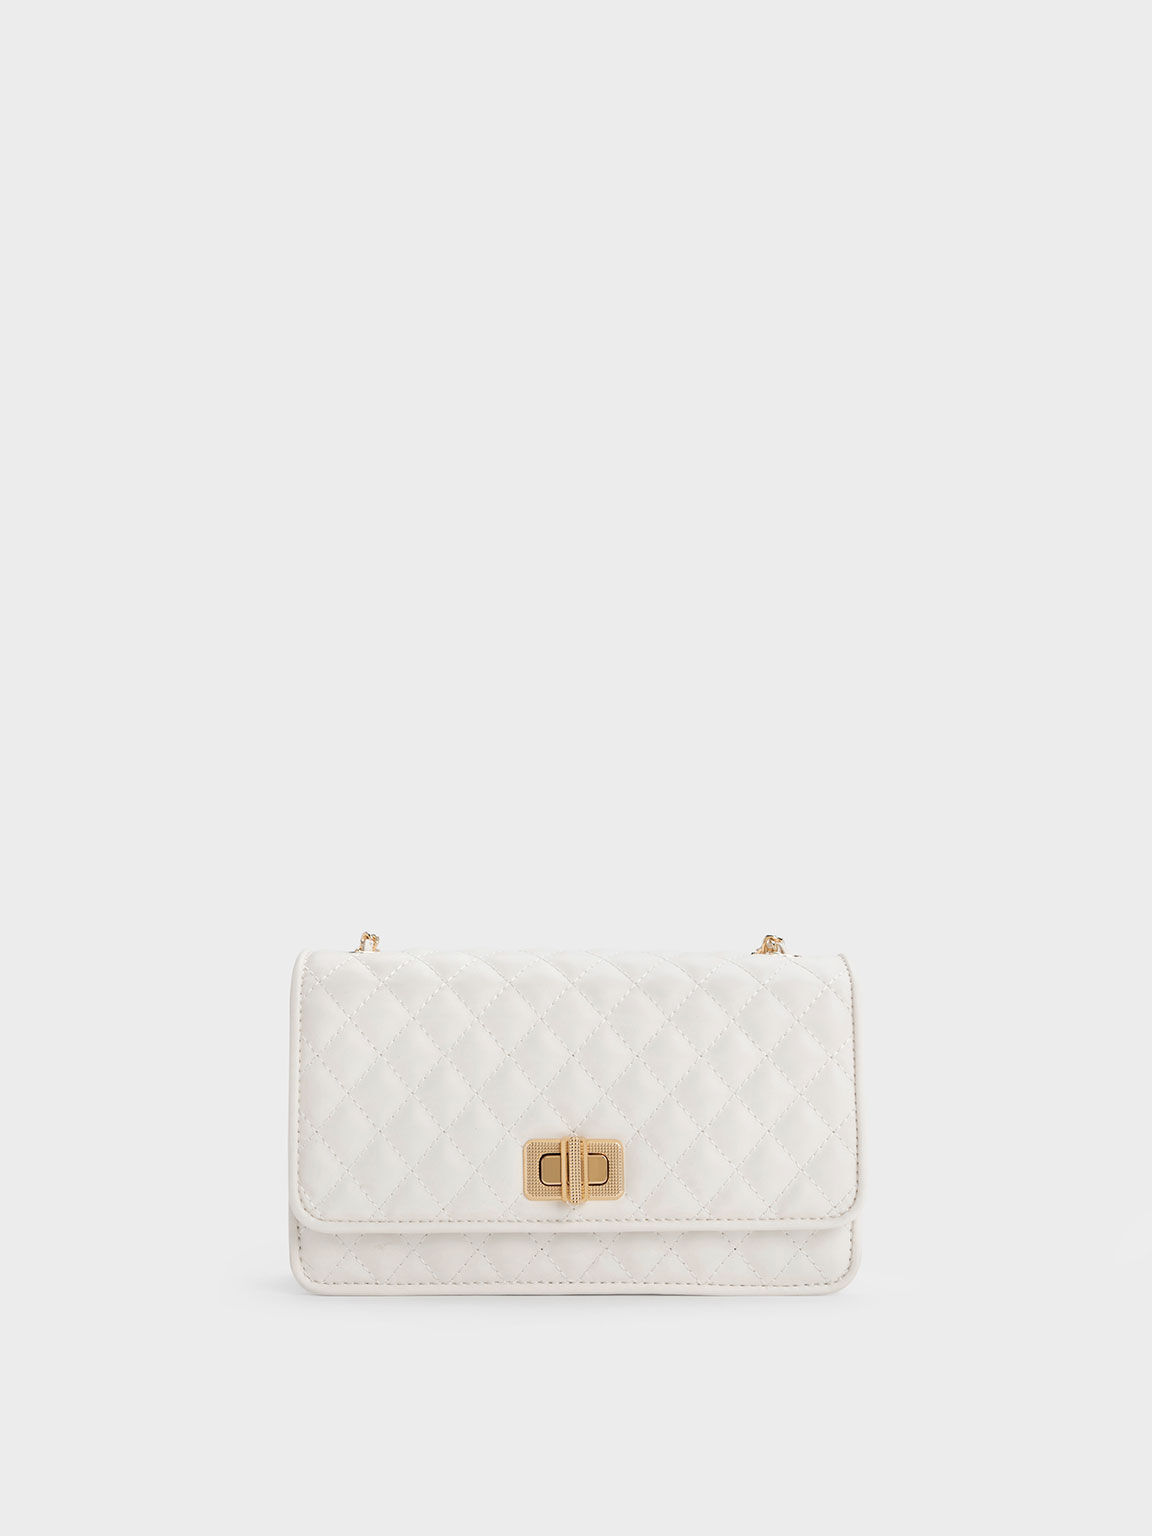 Metallic Turn-Lock Quilted Clutch, White, hi-res